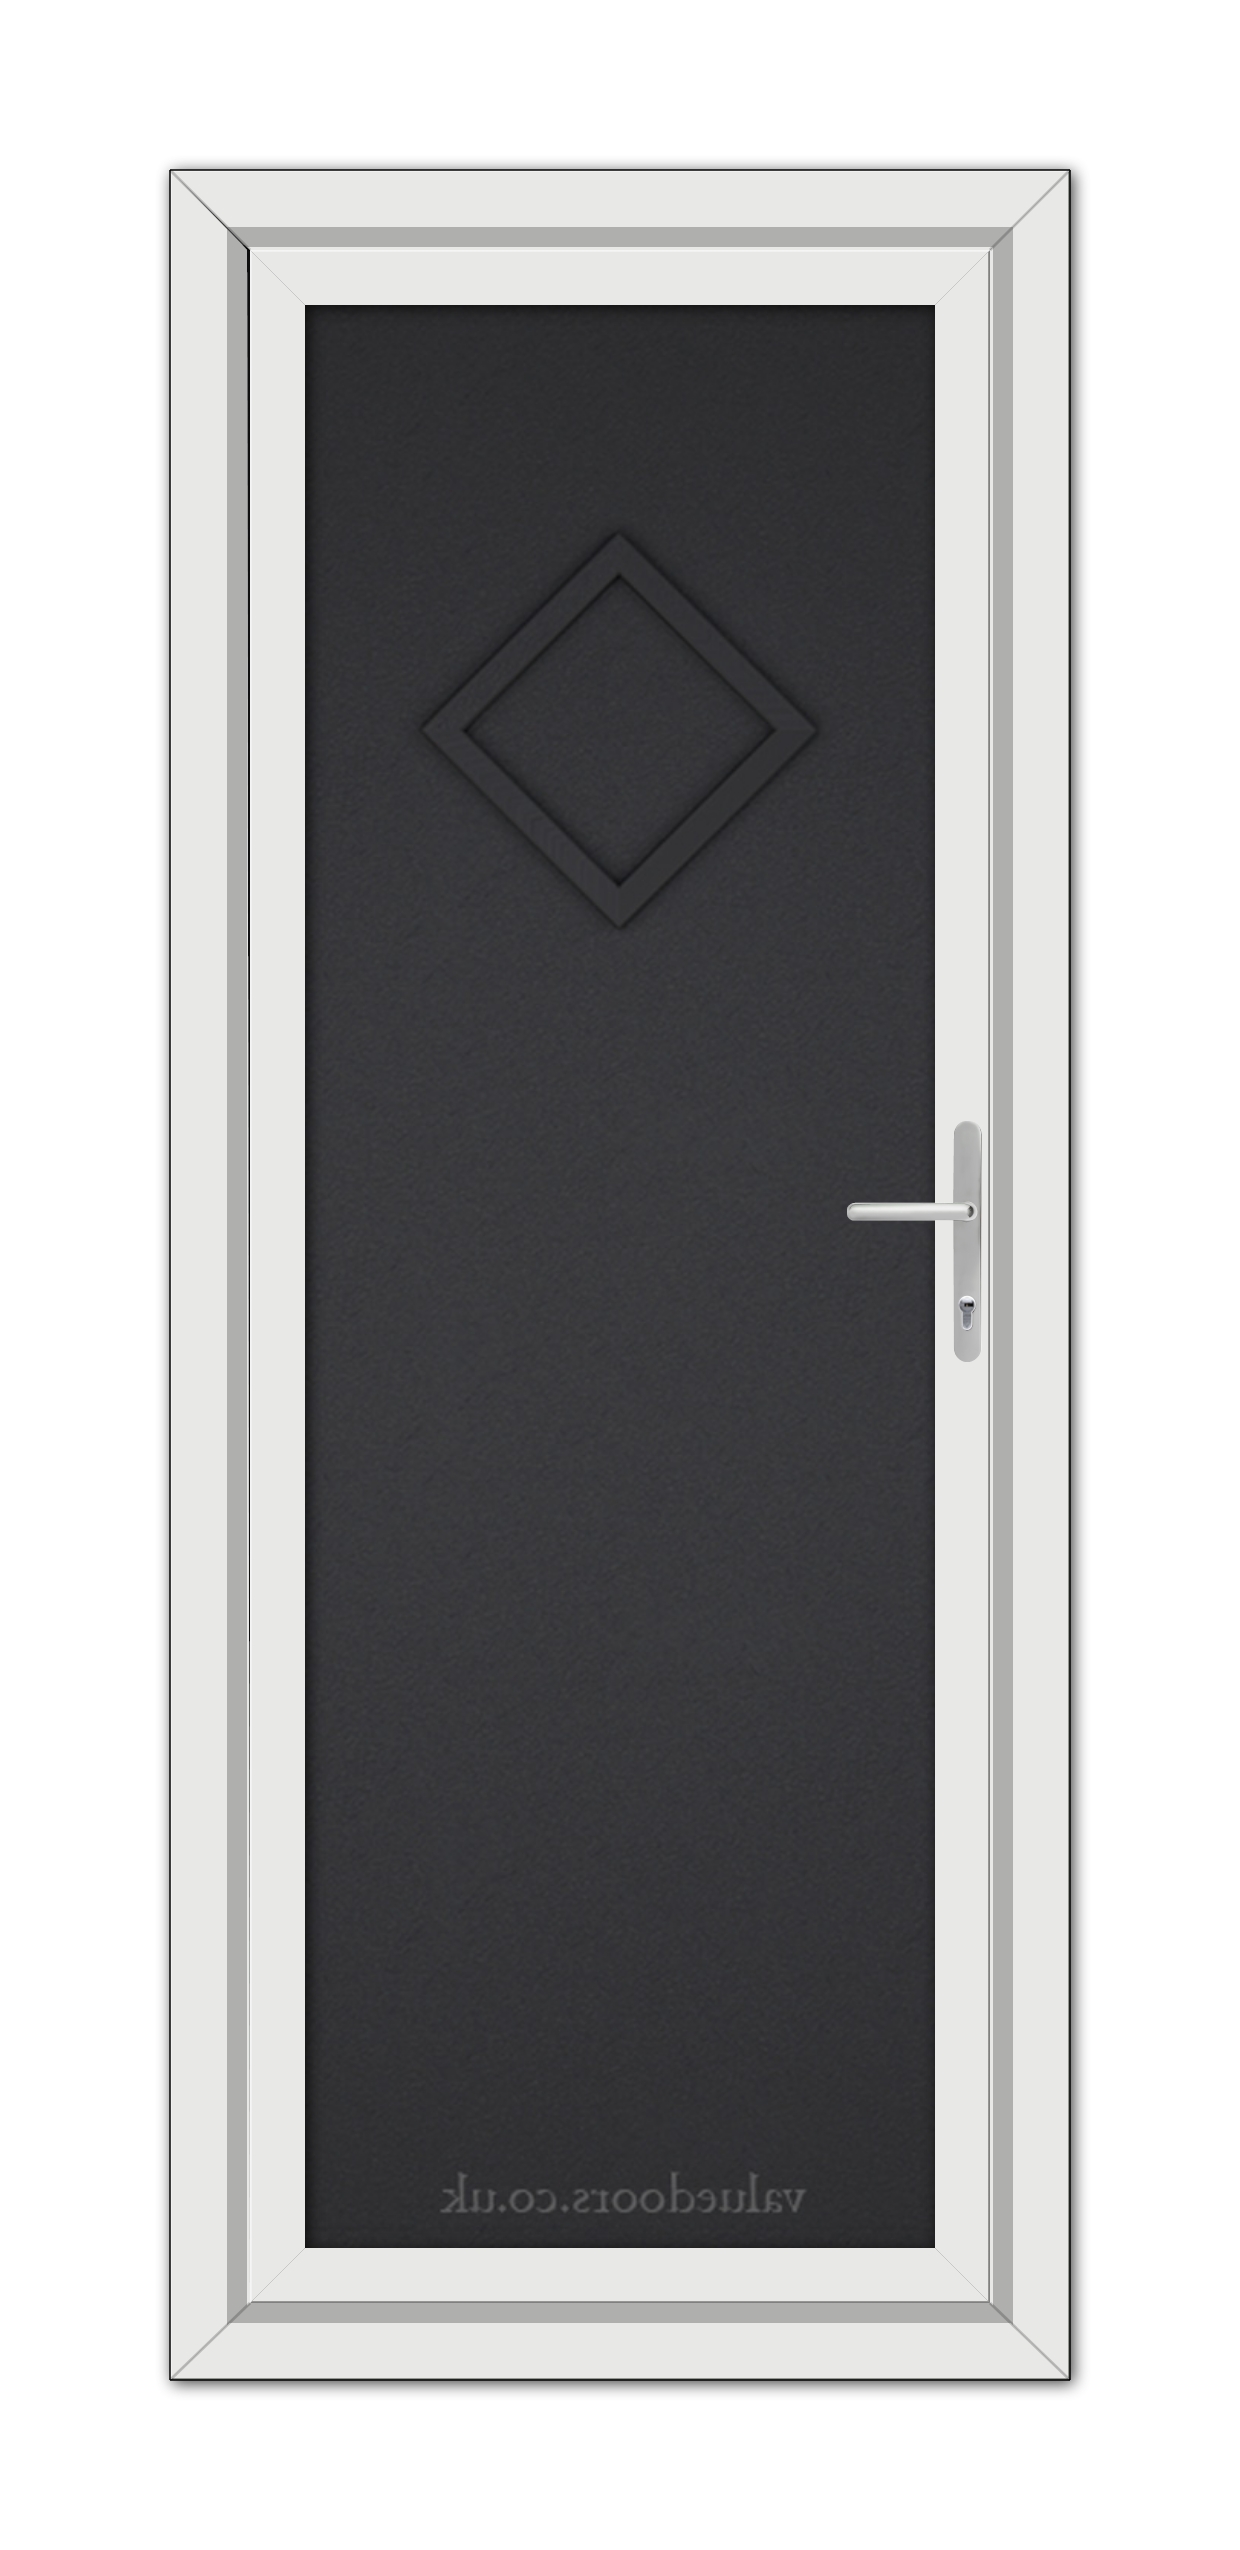 A Black Brown Modern 5131 Solid uPVC Door with a white frame, featuring a geometric diamond-shaped design and a silver handle on the right side.